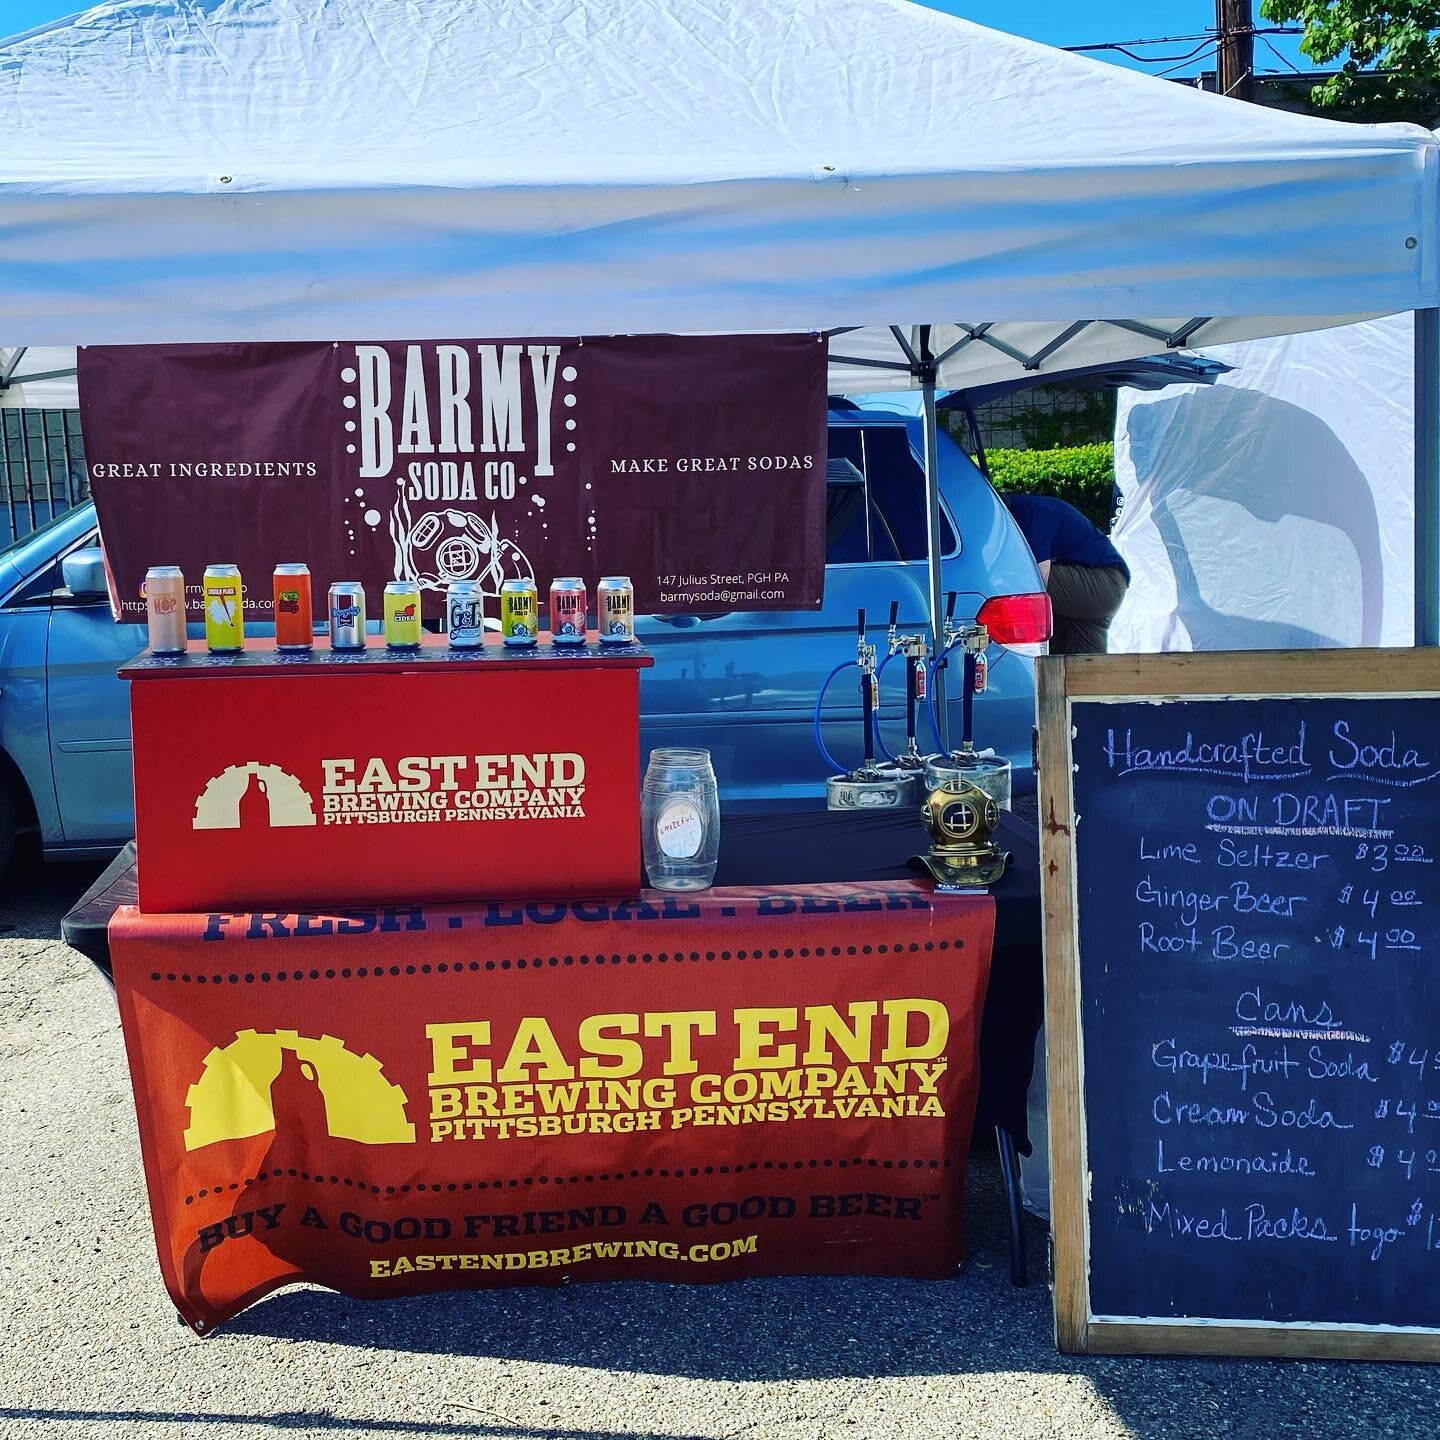 All set is at the Mexican War Street Yard Sale!! Come find us in the parking lot - corner of Sherman &amp; Eloise streets- hanging here w it h @eastendbrewing #mexicanwarstreetspgh